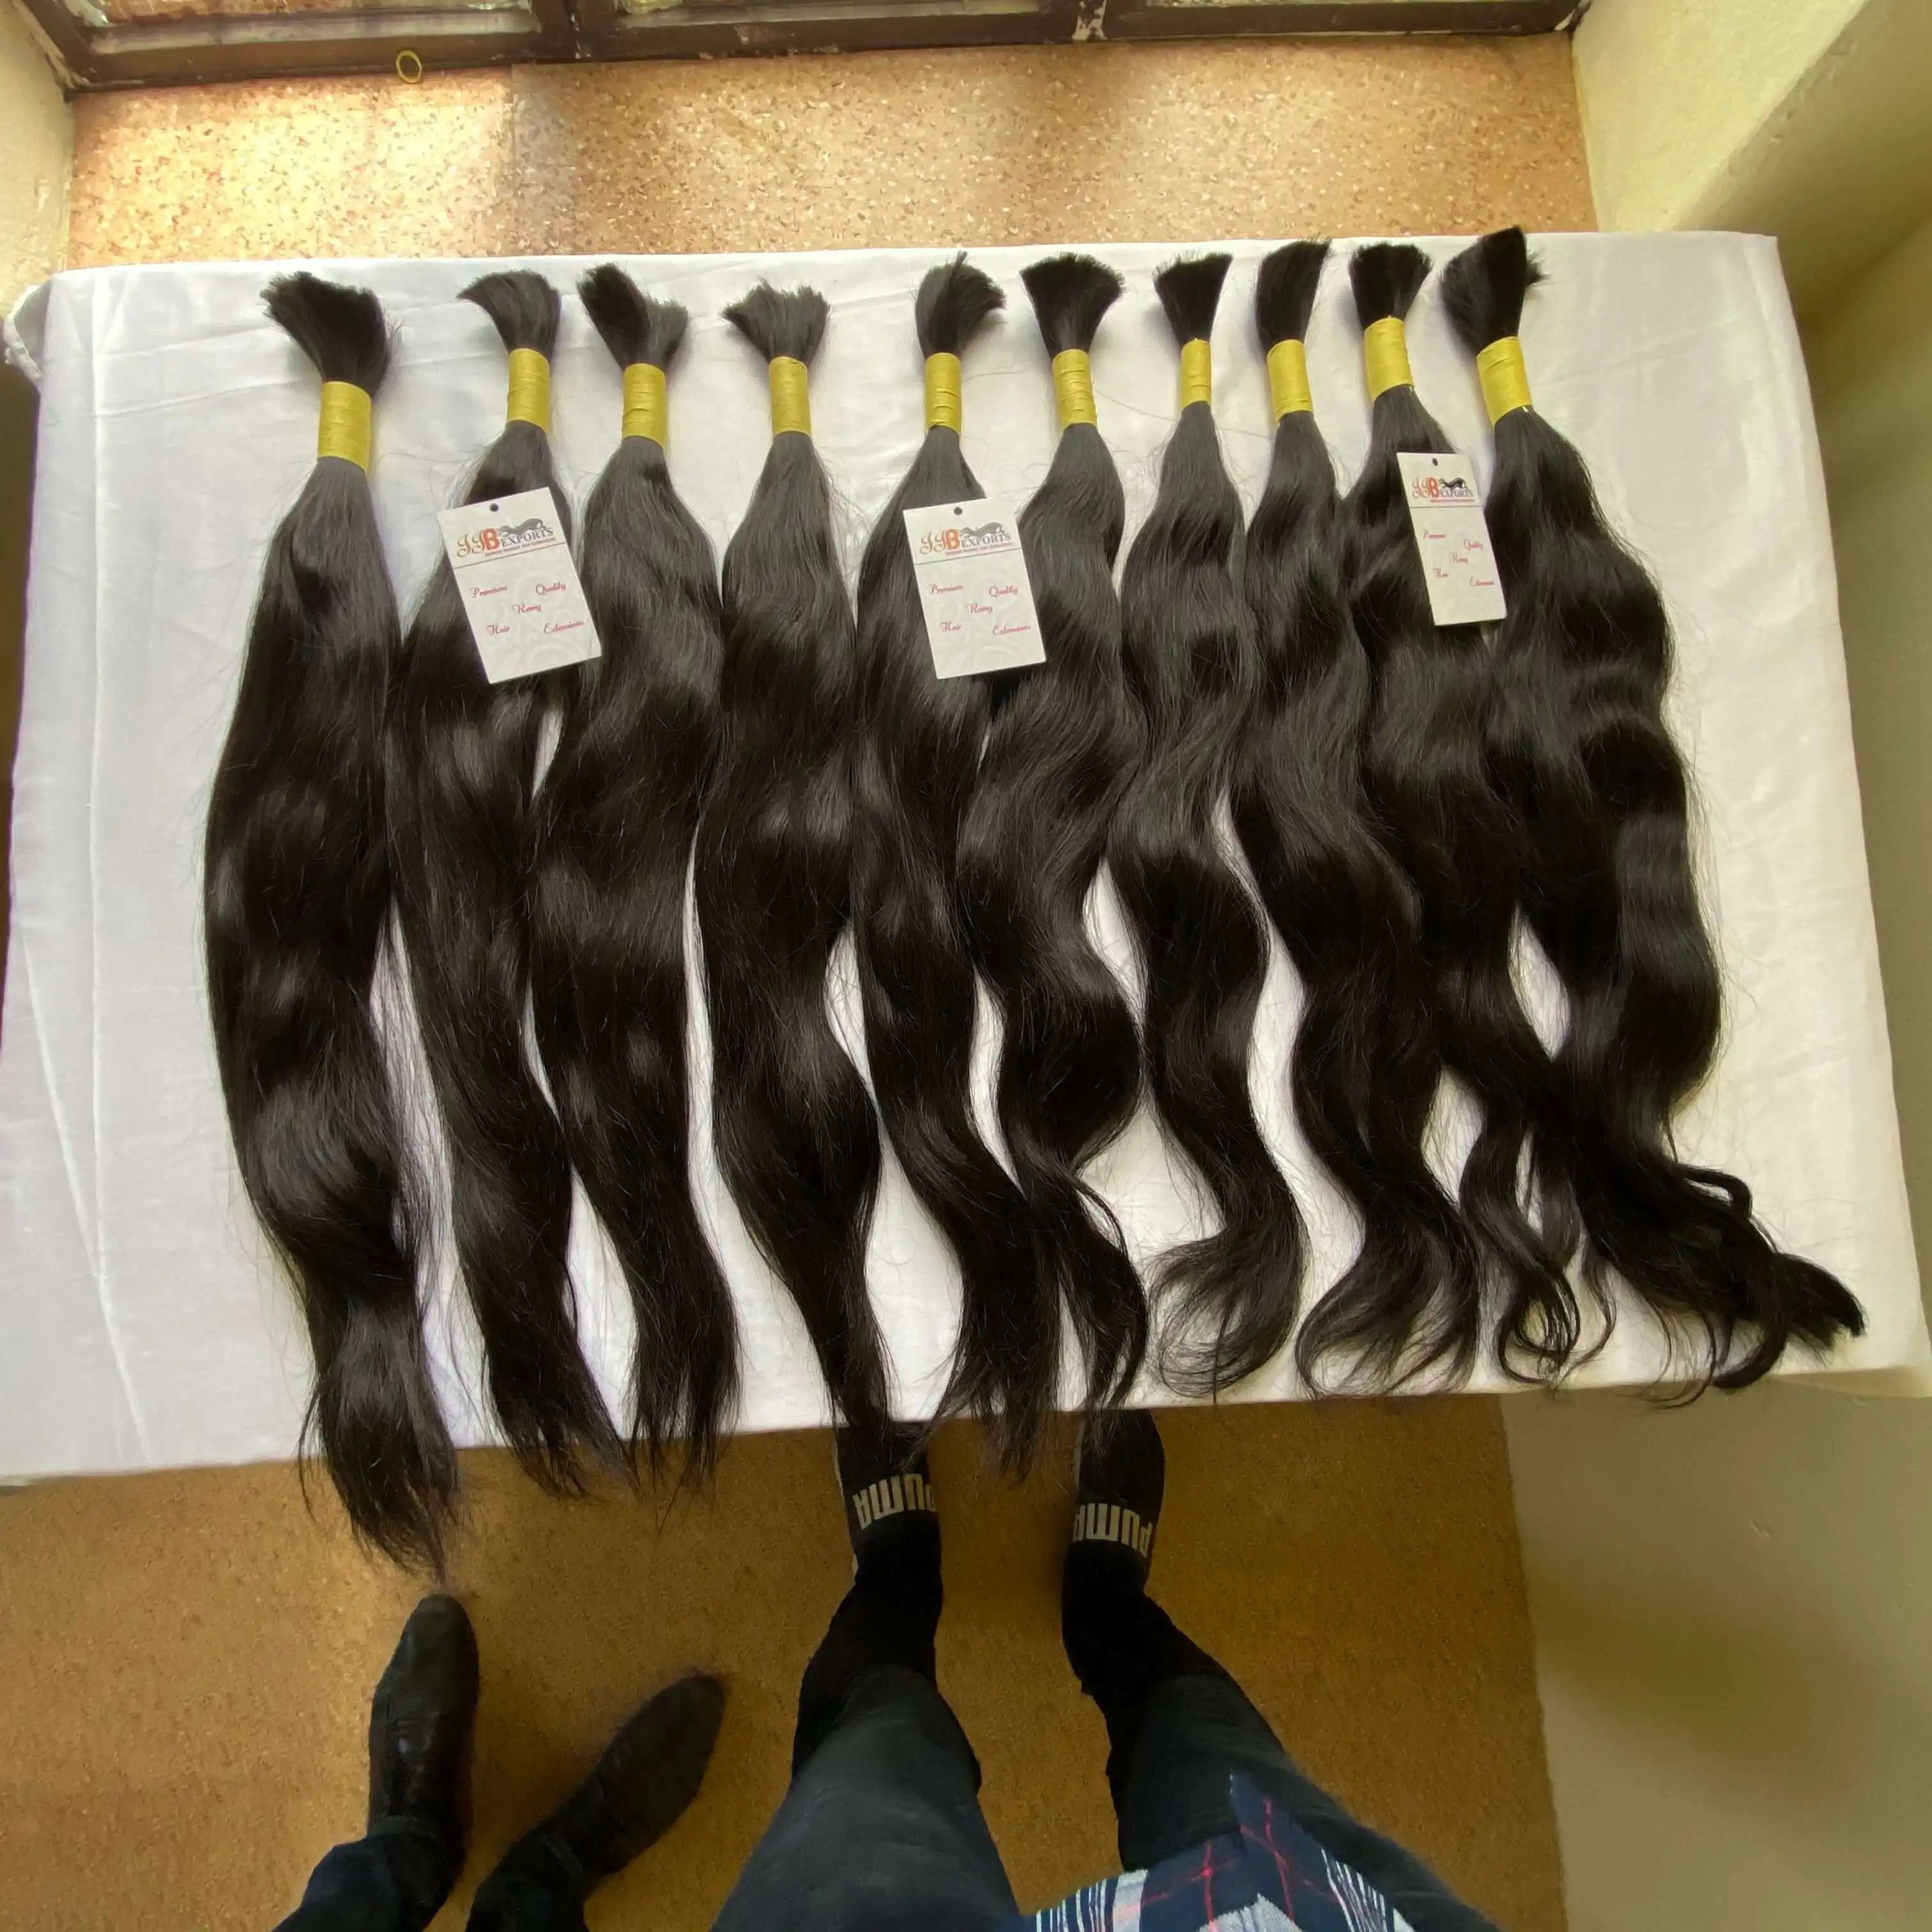 Wholesale Virgin Brazilian/Cambodian/Peruvian Human Hair Bulk Buy From India, Remy Temple Raw Unprocessed Hair available